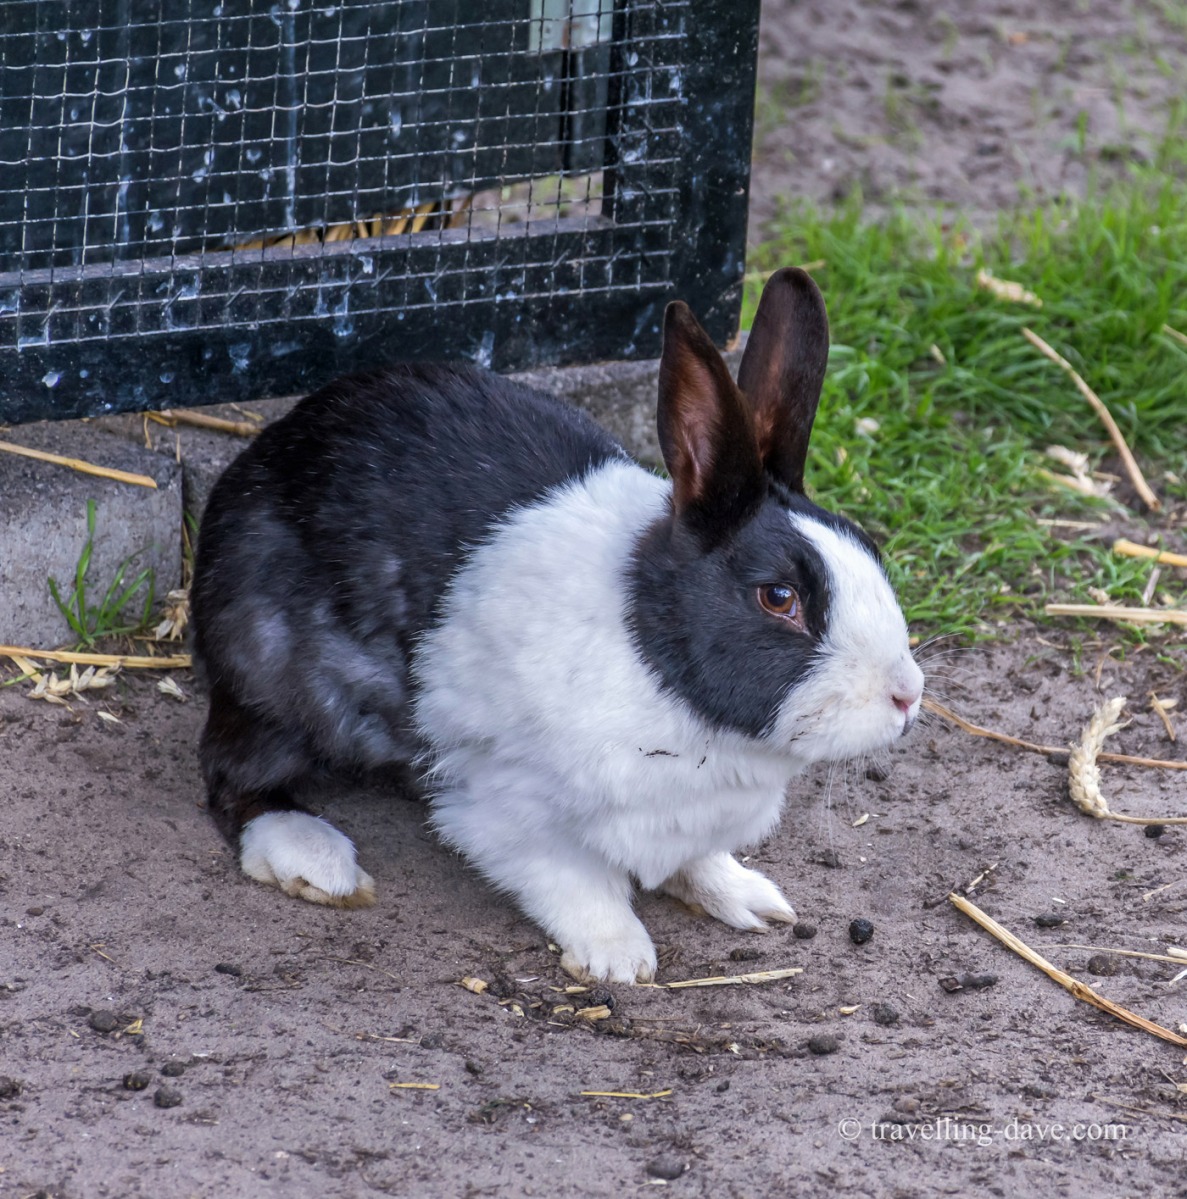 View of a black and white bunny rabbit